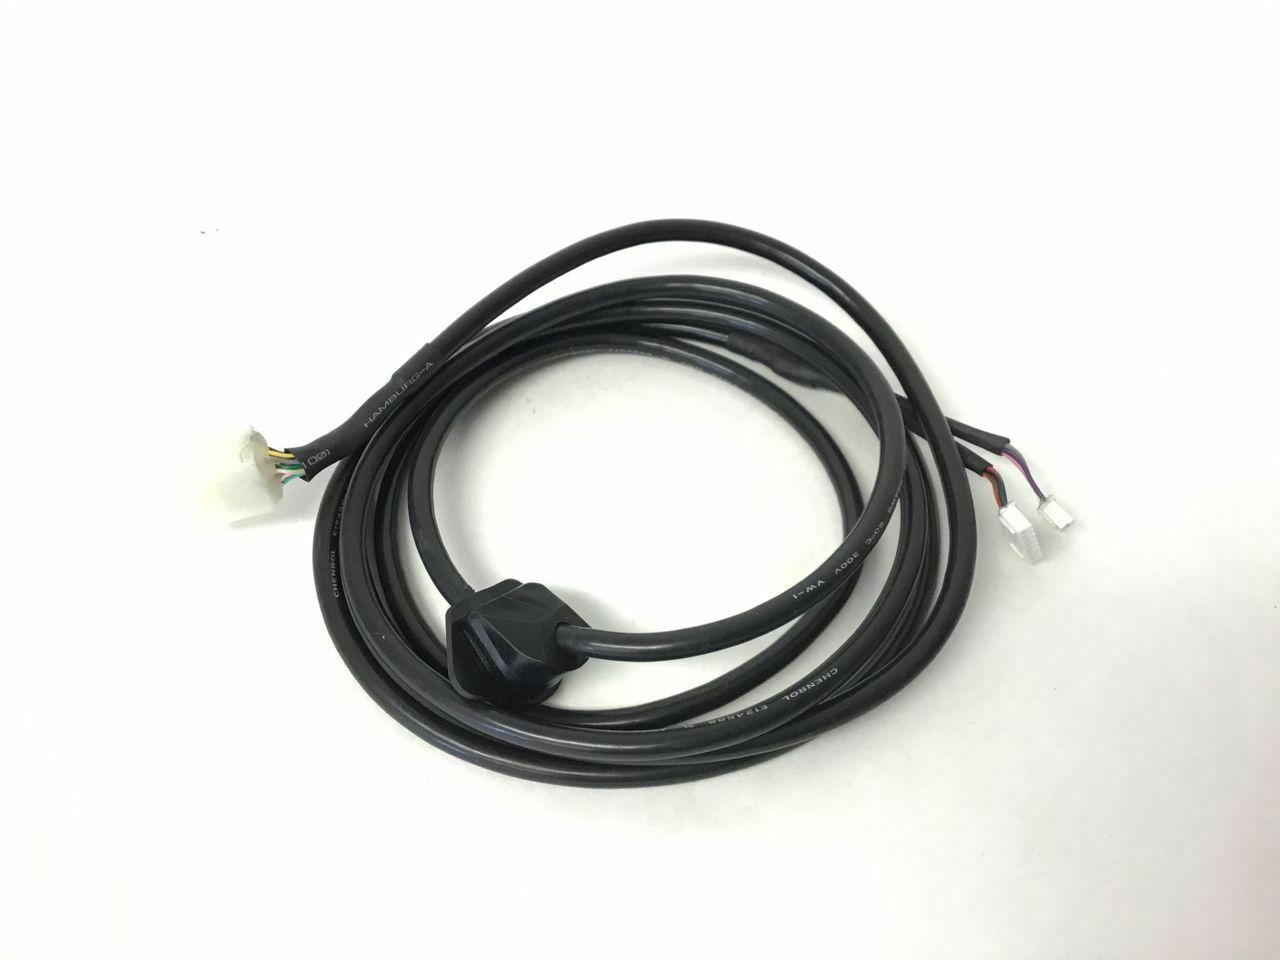 BH Fitness T6 sport Treadmill Control Cable Wire Harness